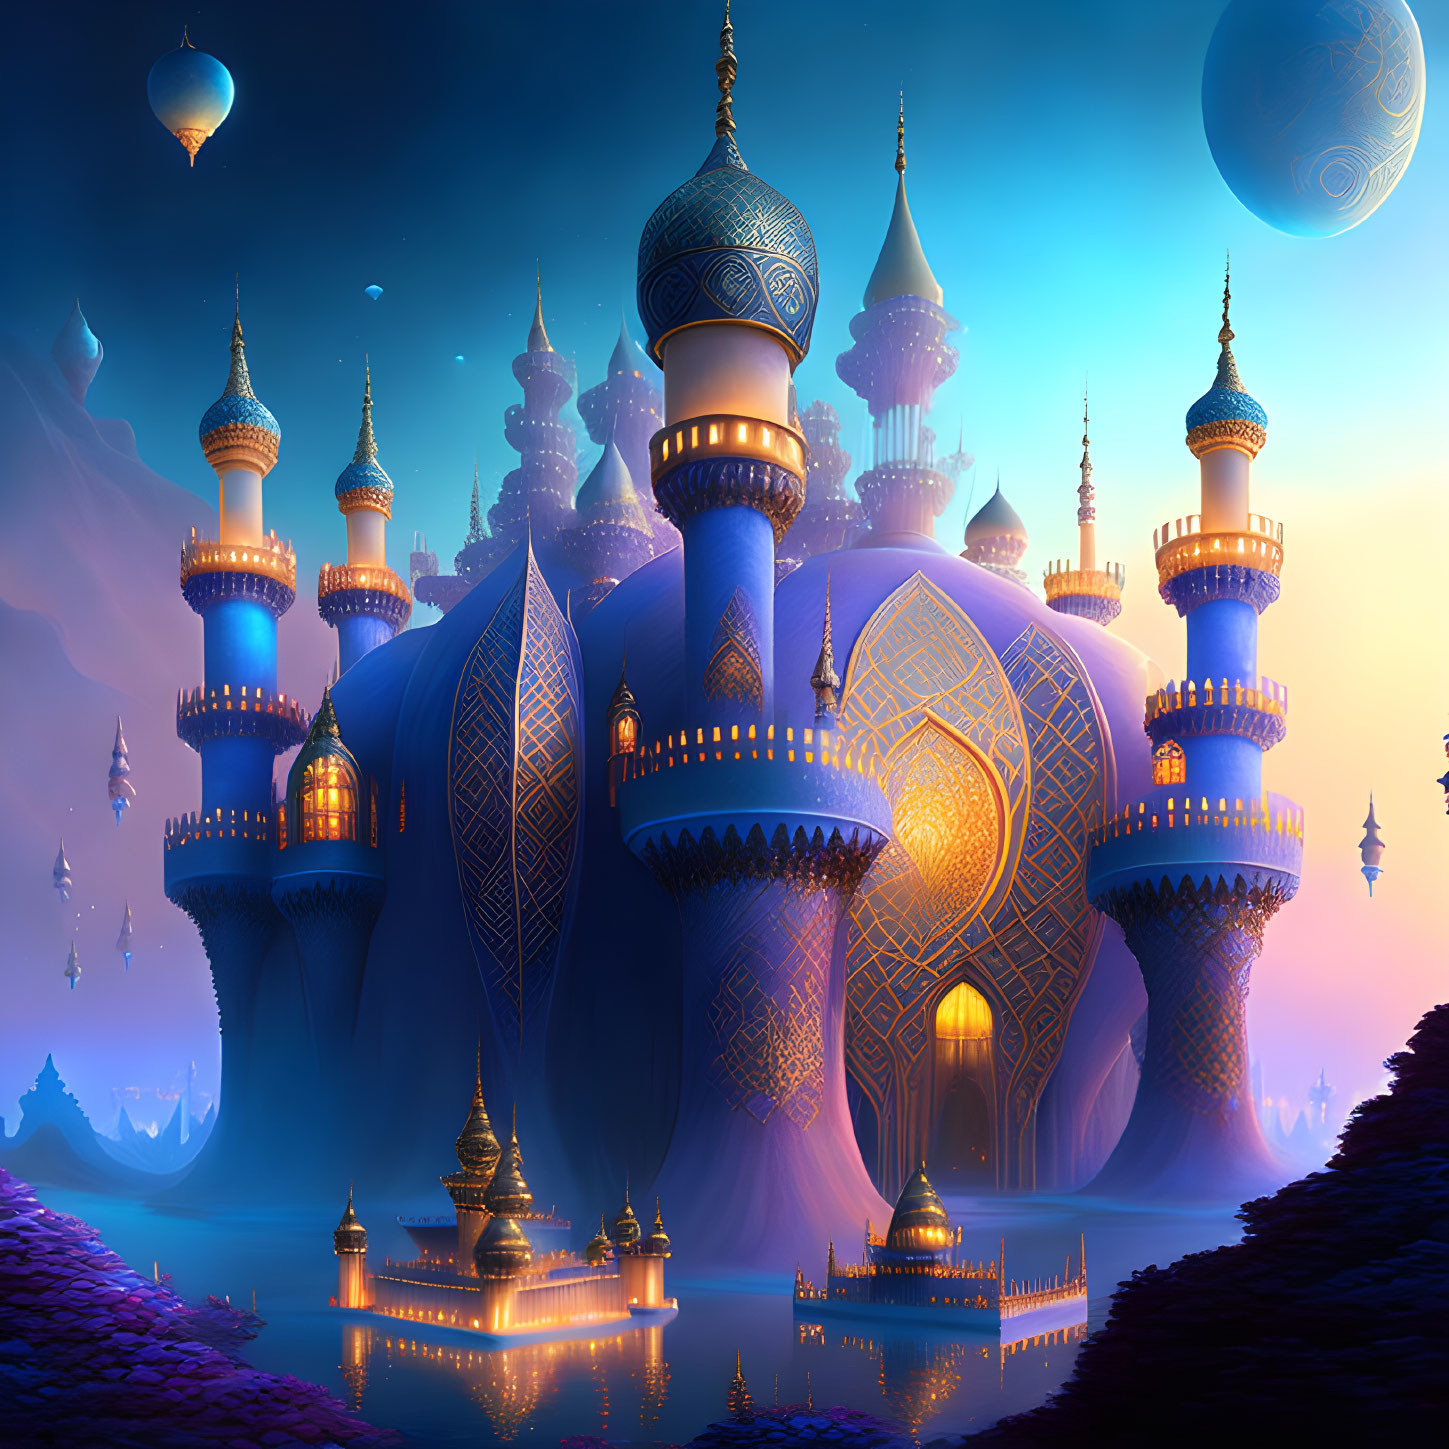 Mystical palace digital artwork with glowing blue domes and floating balloons